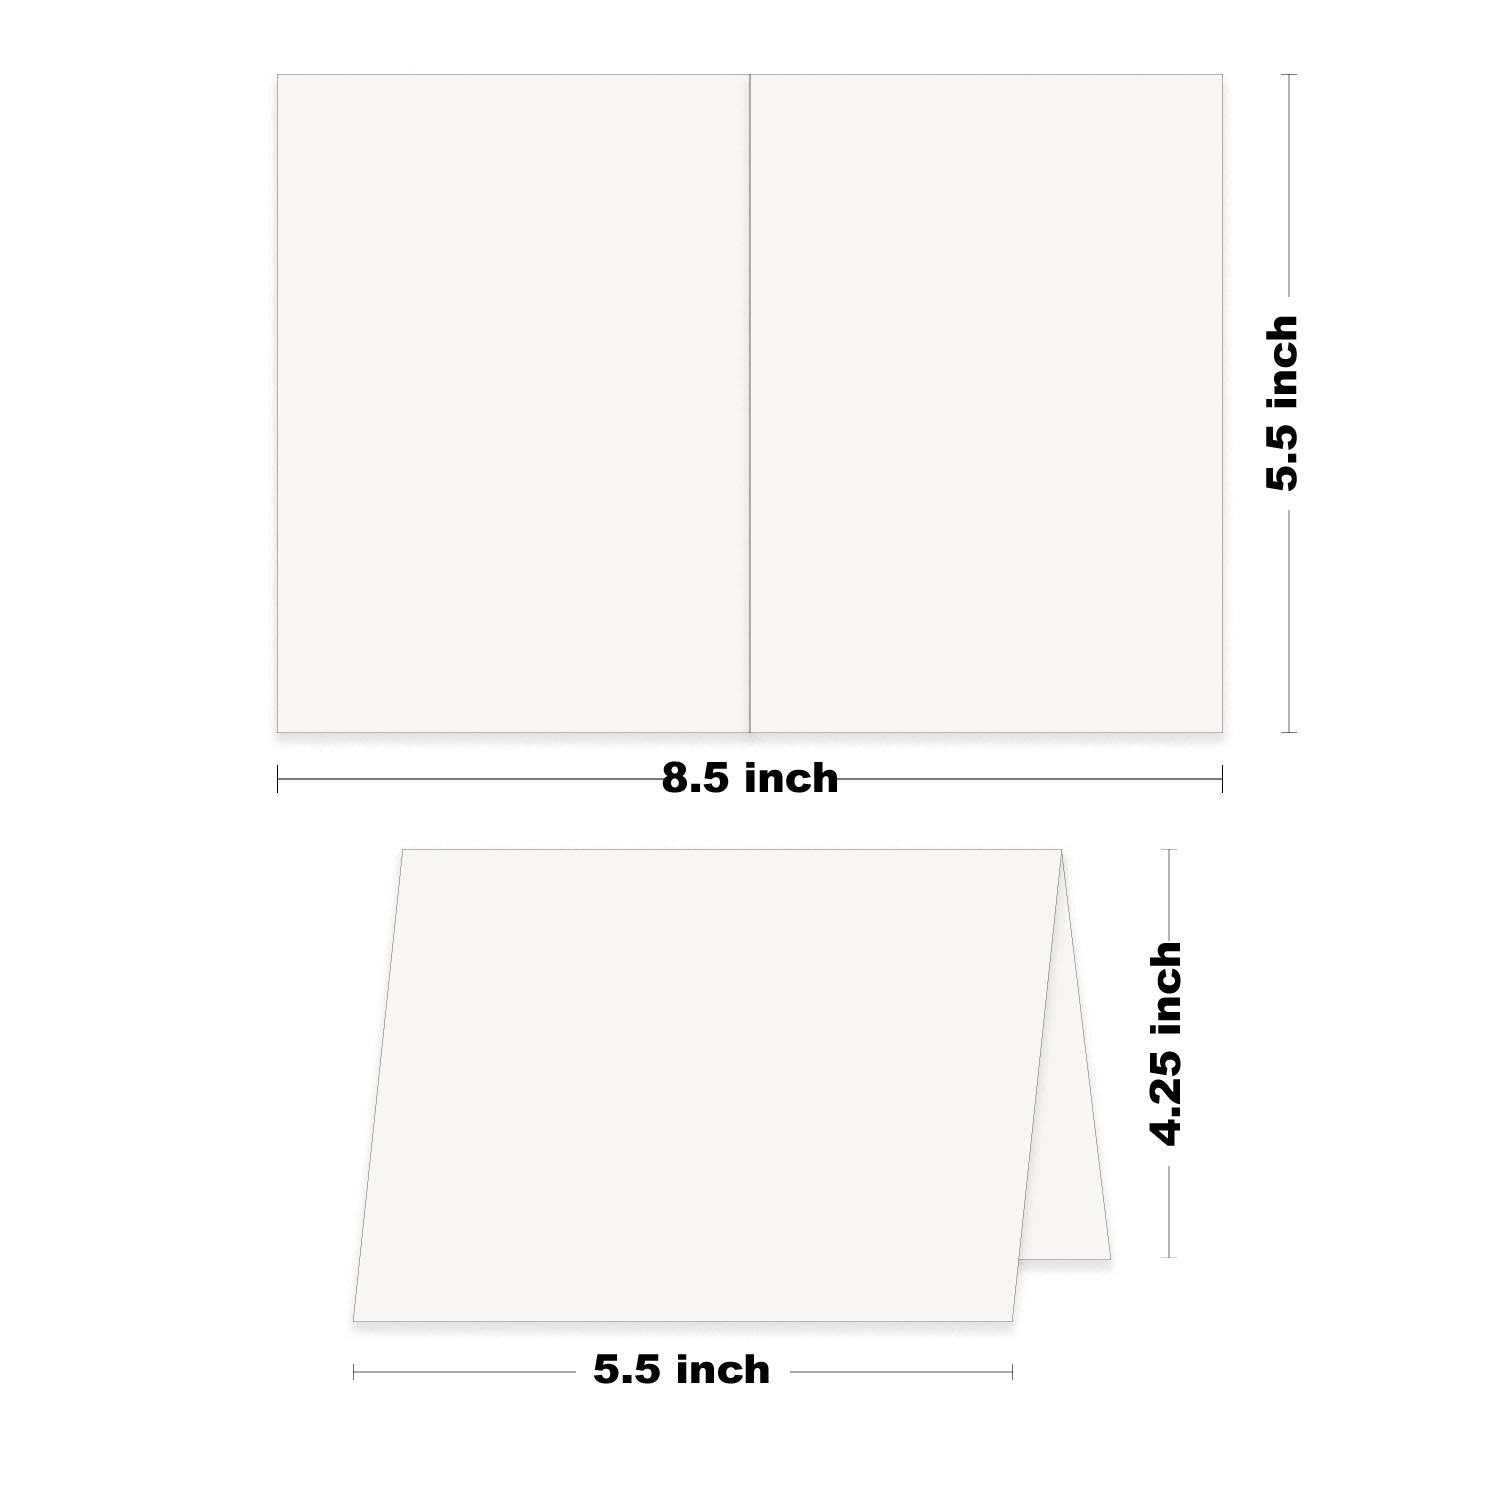 Basic 3x5 inch colored cards for art work, stamping, and card making -  CutCardStock